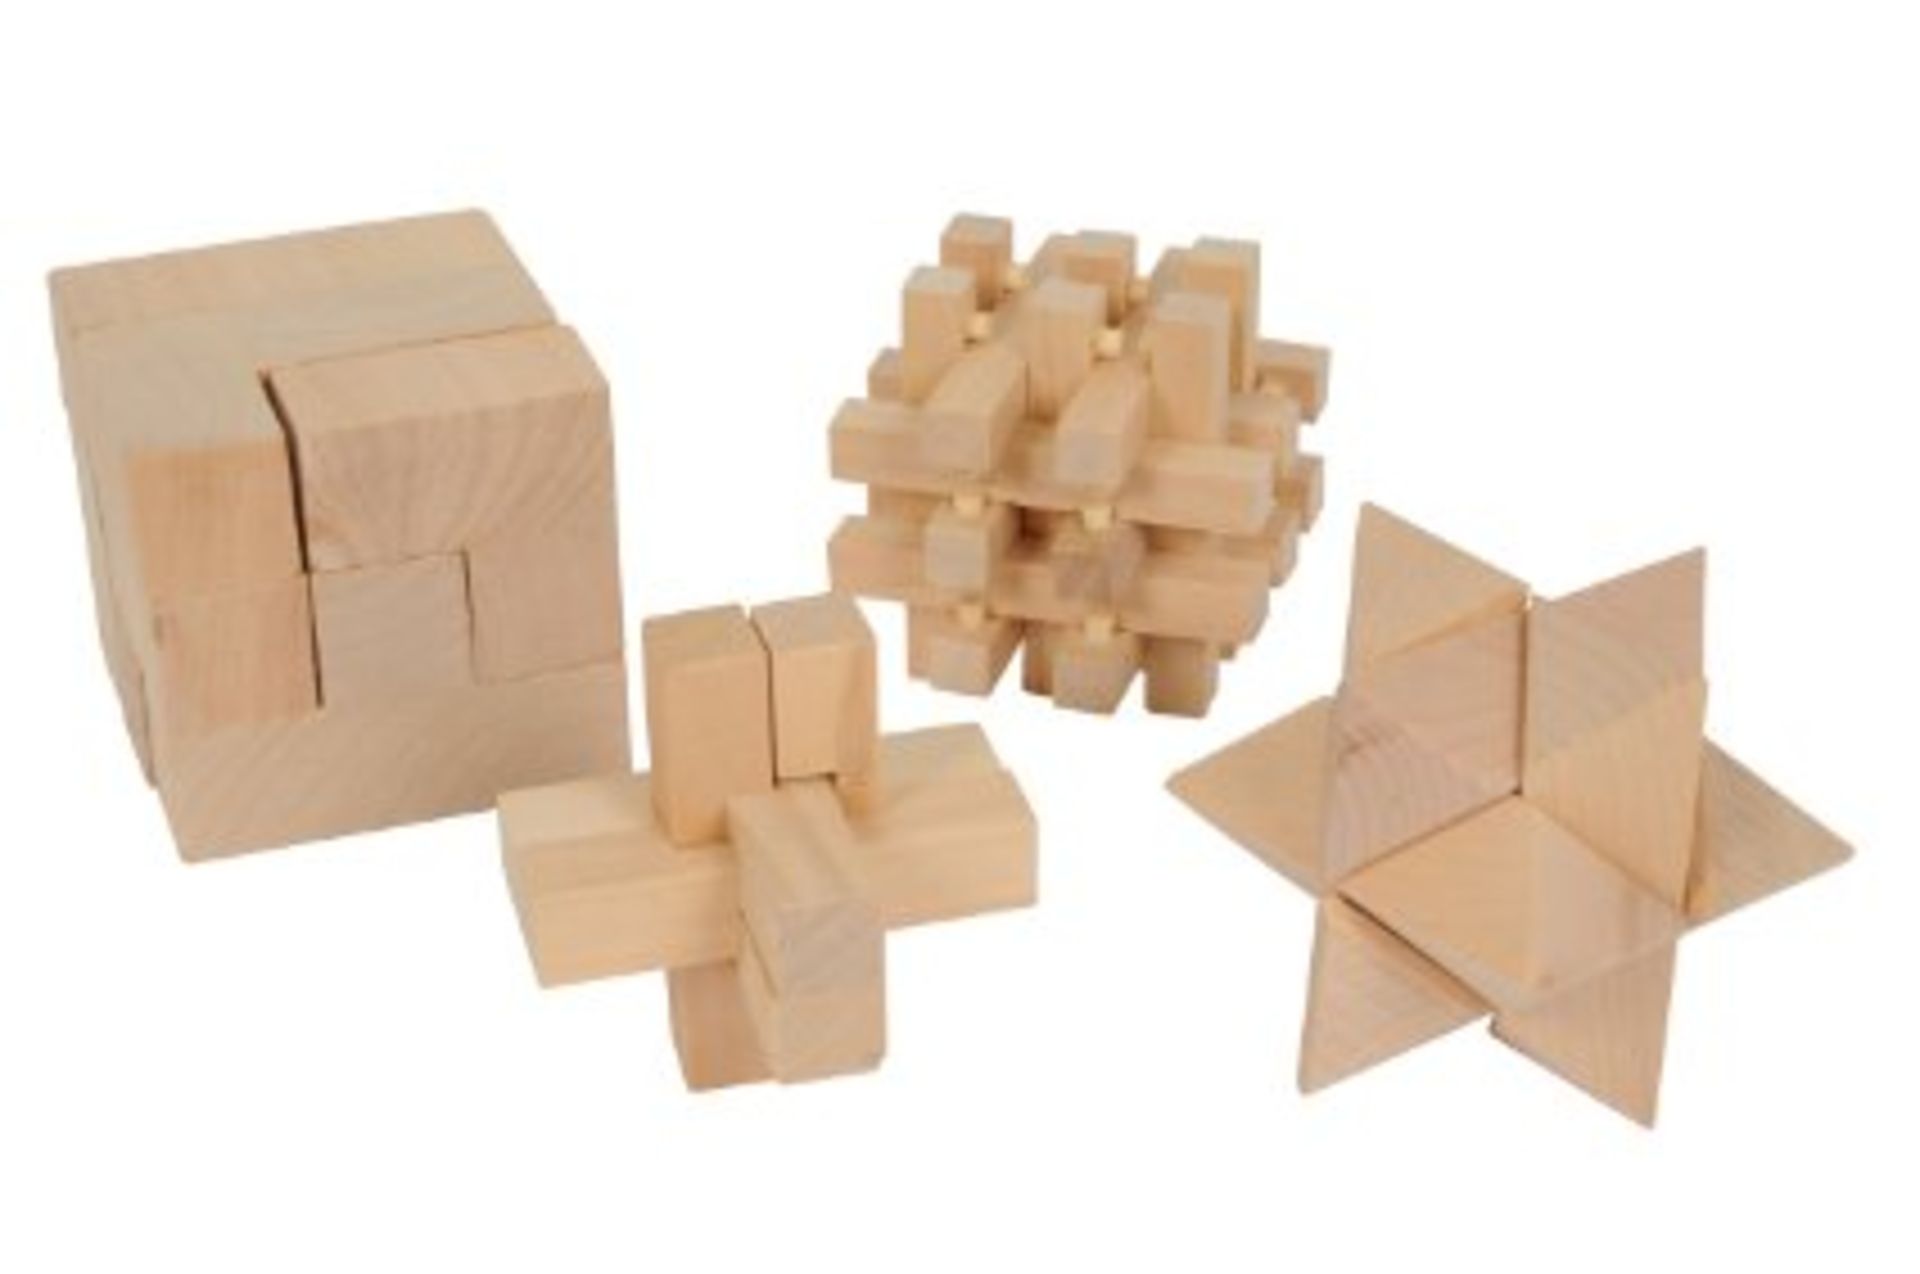 V Brand New Boxed Set Four Quality Wooden Brain Teaser Puzzles £10.89 on Ebay